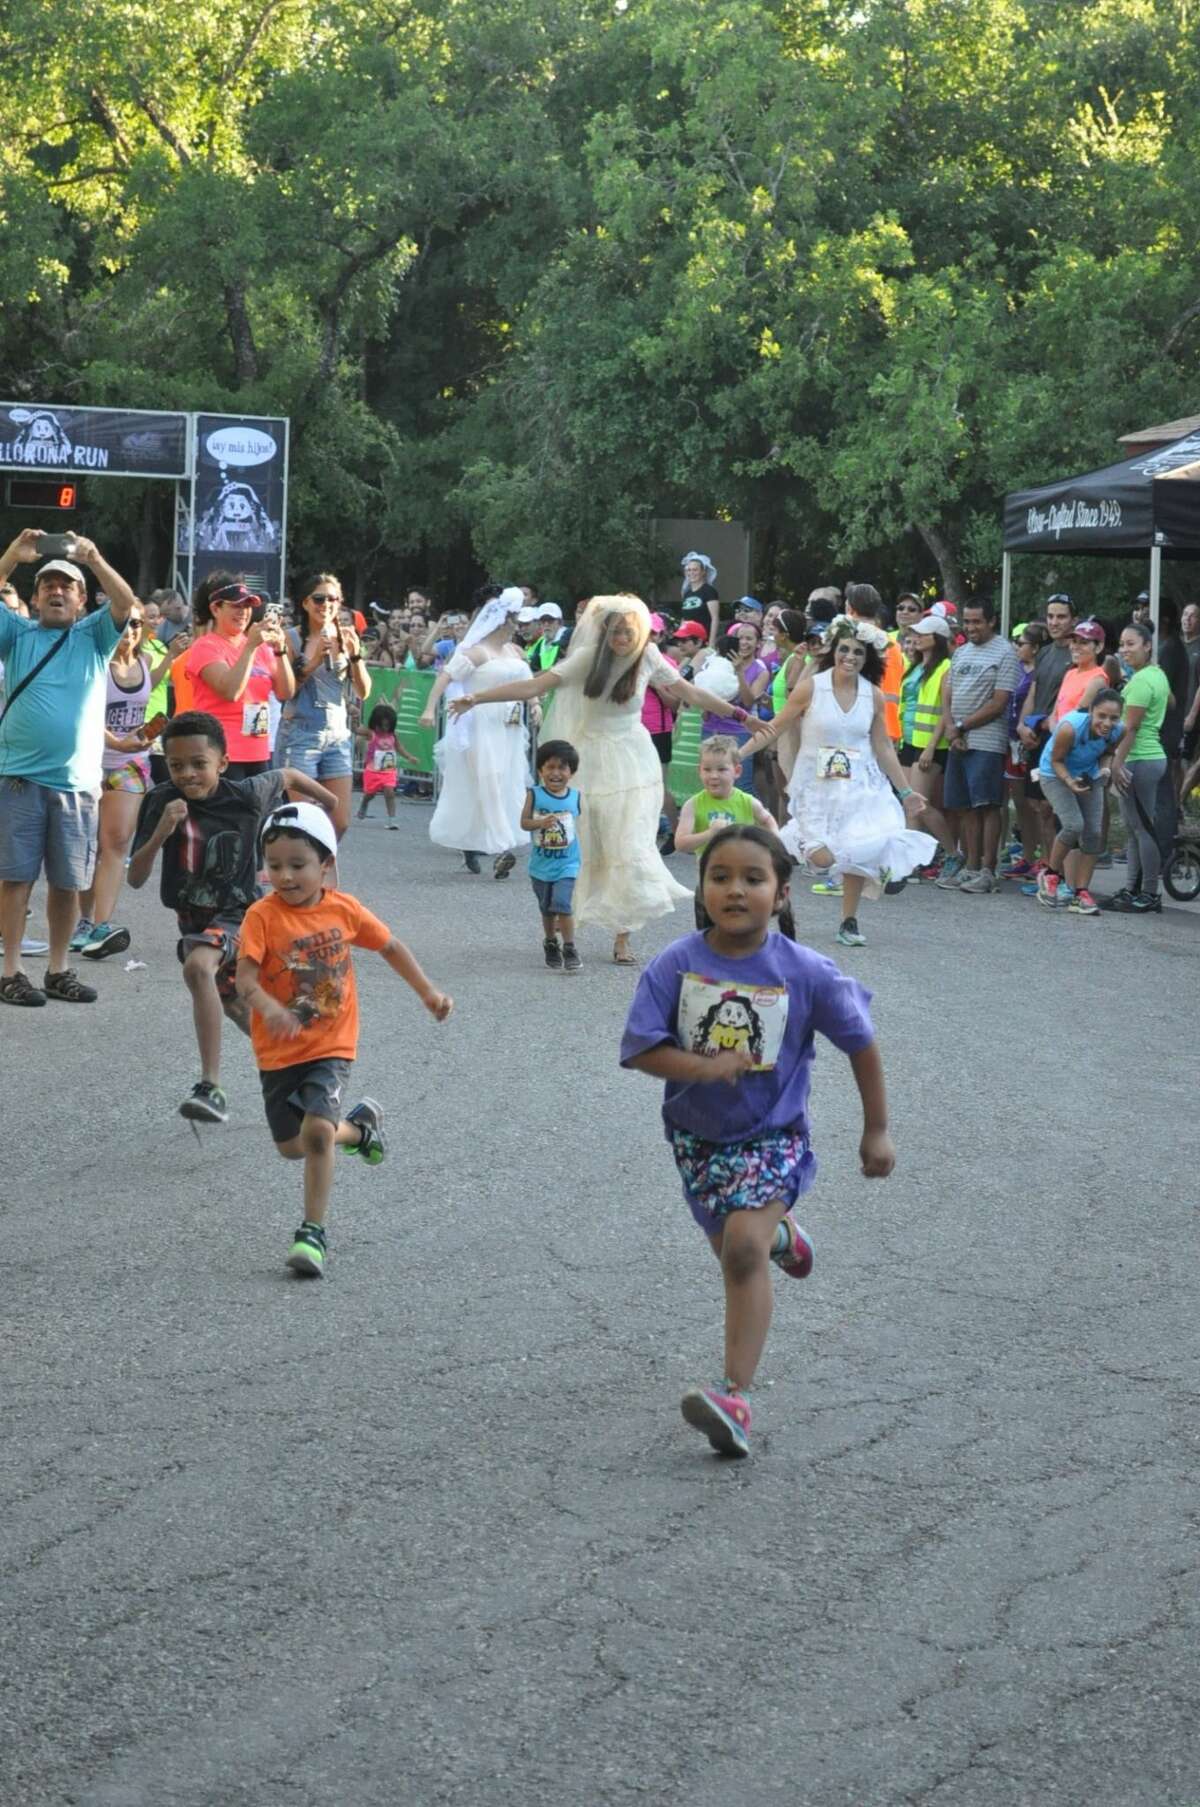 From 6 to 9 p.m. on Saturday, teams of four runners will take on the 2-mile La Llorona Relay Run at Lady Bird Johnson Park . The 2019 event marks the 4th year that runners dress up in ghoulish gear and take to the trails.